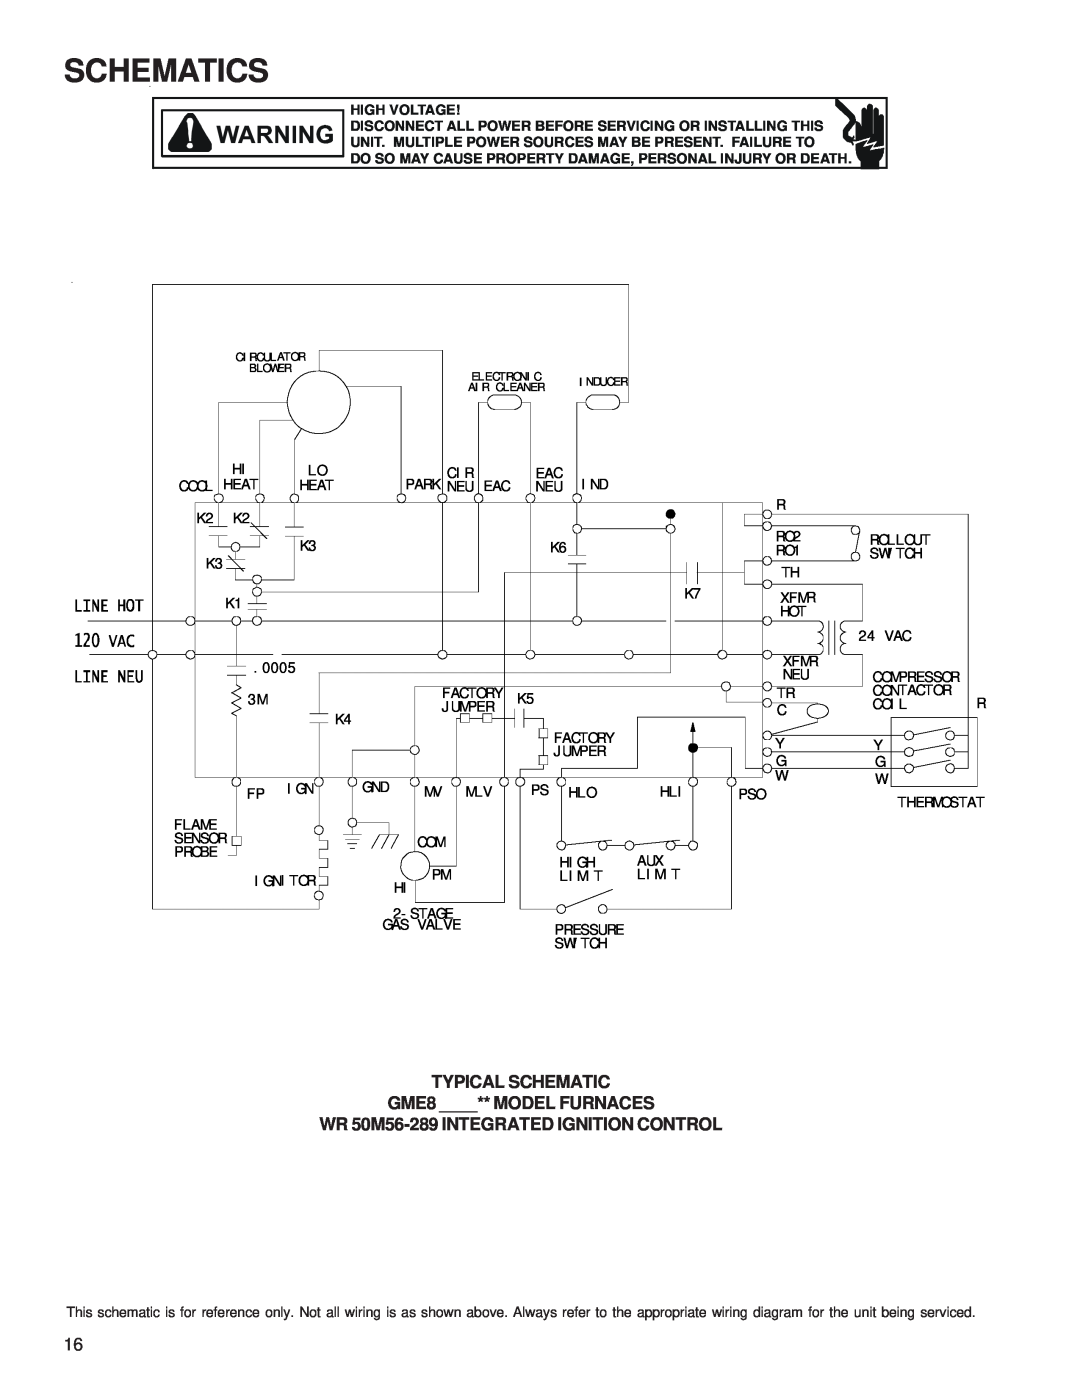 Goodman Mfg service manual Schematics, TYPICAL SCHEMATIC GME8 ** MODEL FURNACES, WR 50M56-289INTEGRATED IGNITION CONTROL 